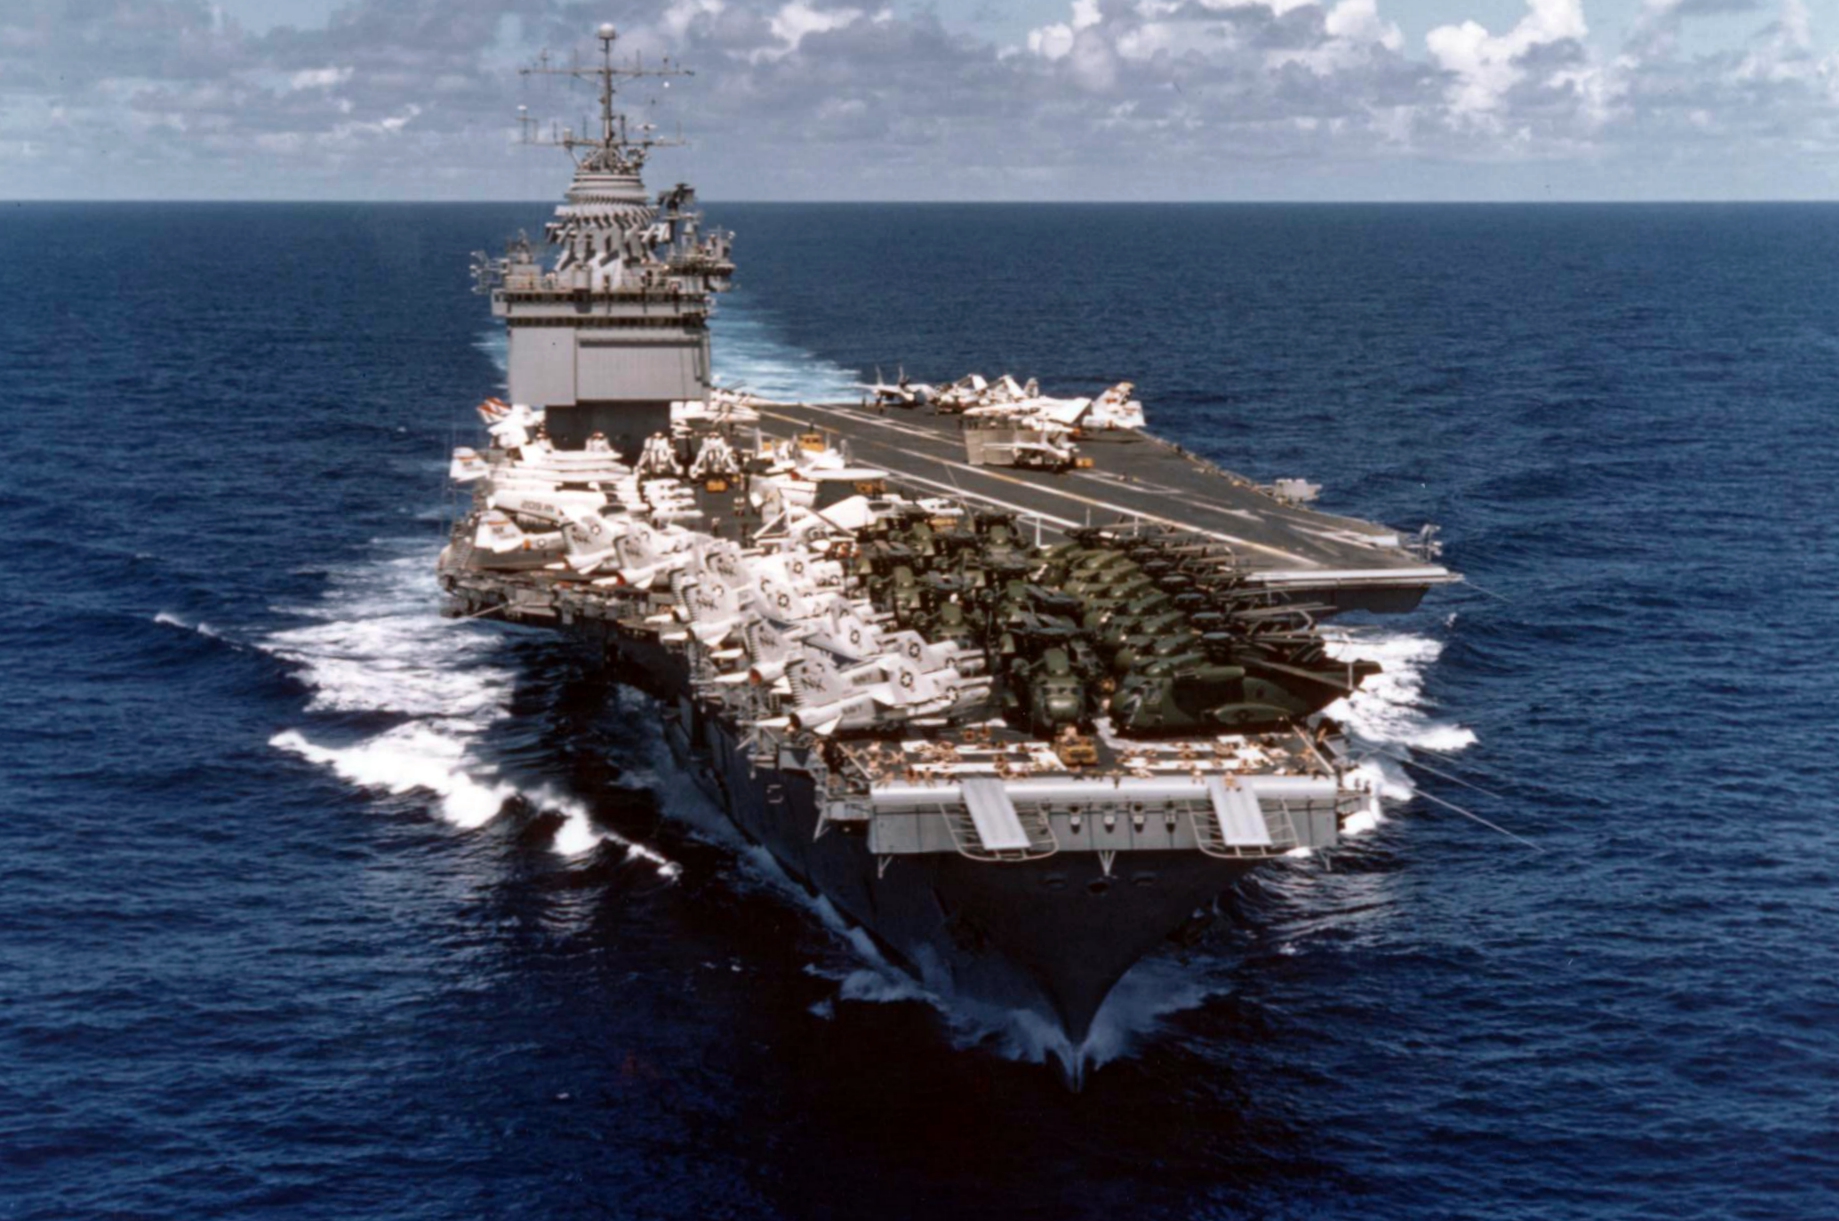 Enterprise en route back to the United States following the evacuation of Saigon; the forward end of the flight deck contains a number of USMC CH-53 Sea Stallion helicopters.